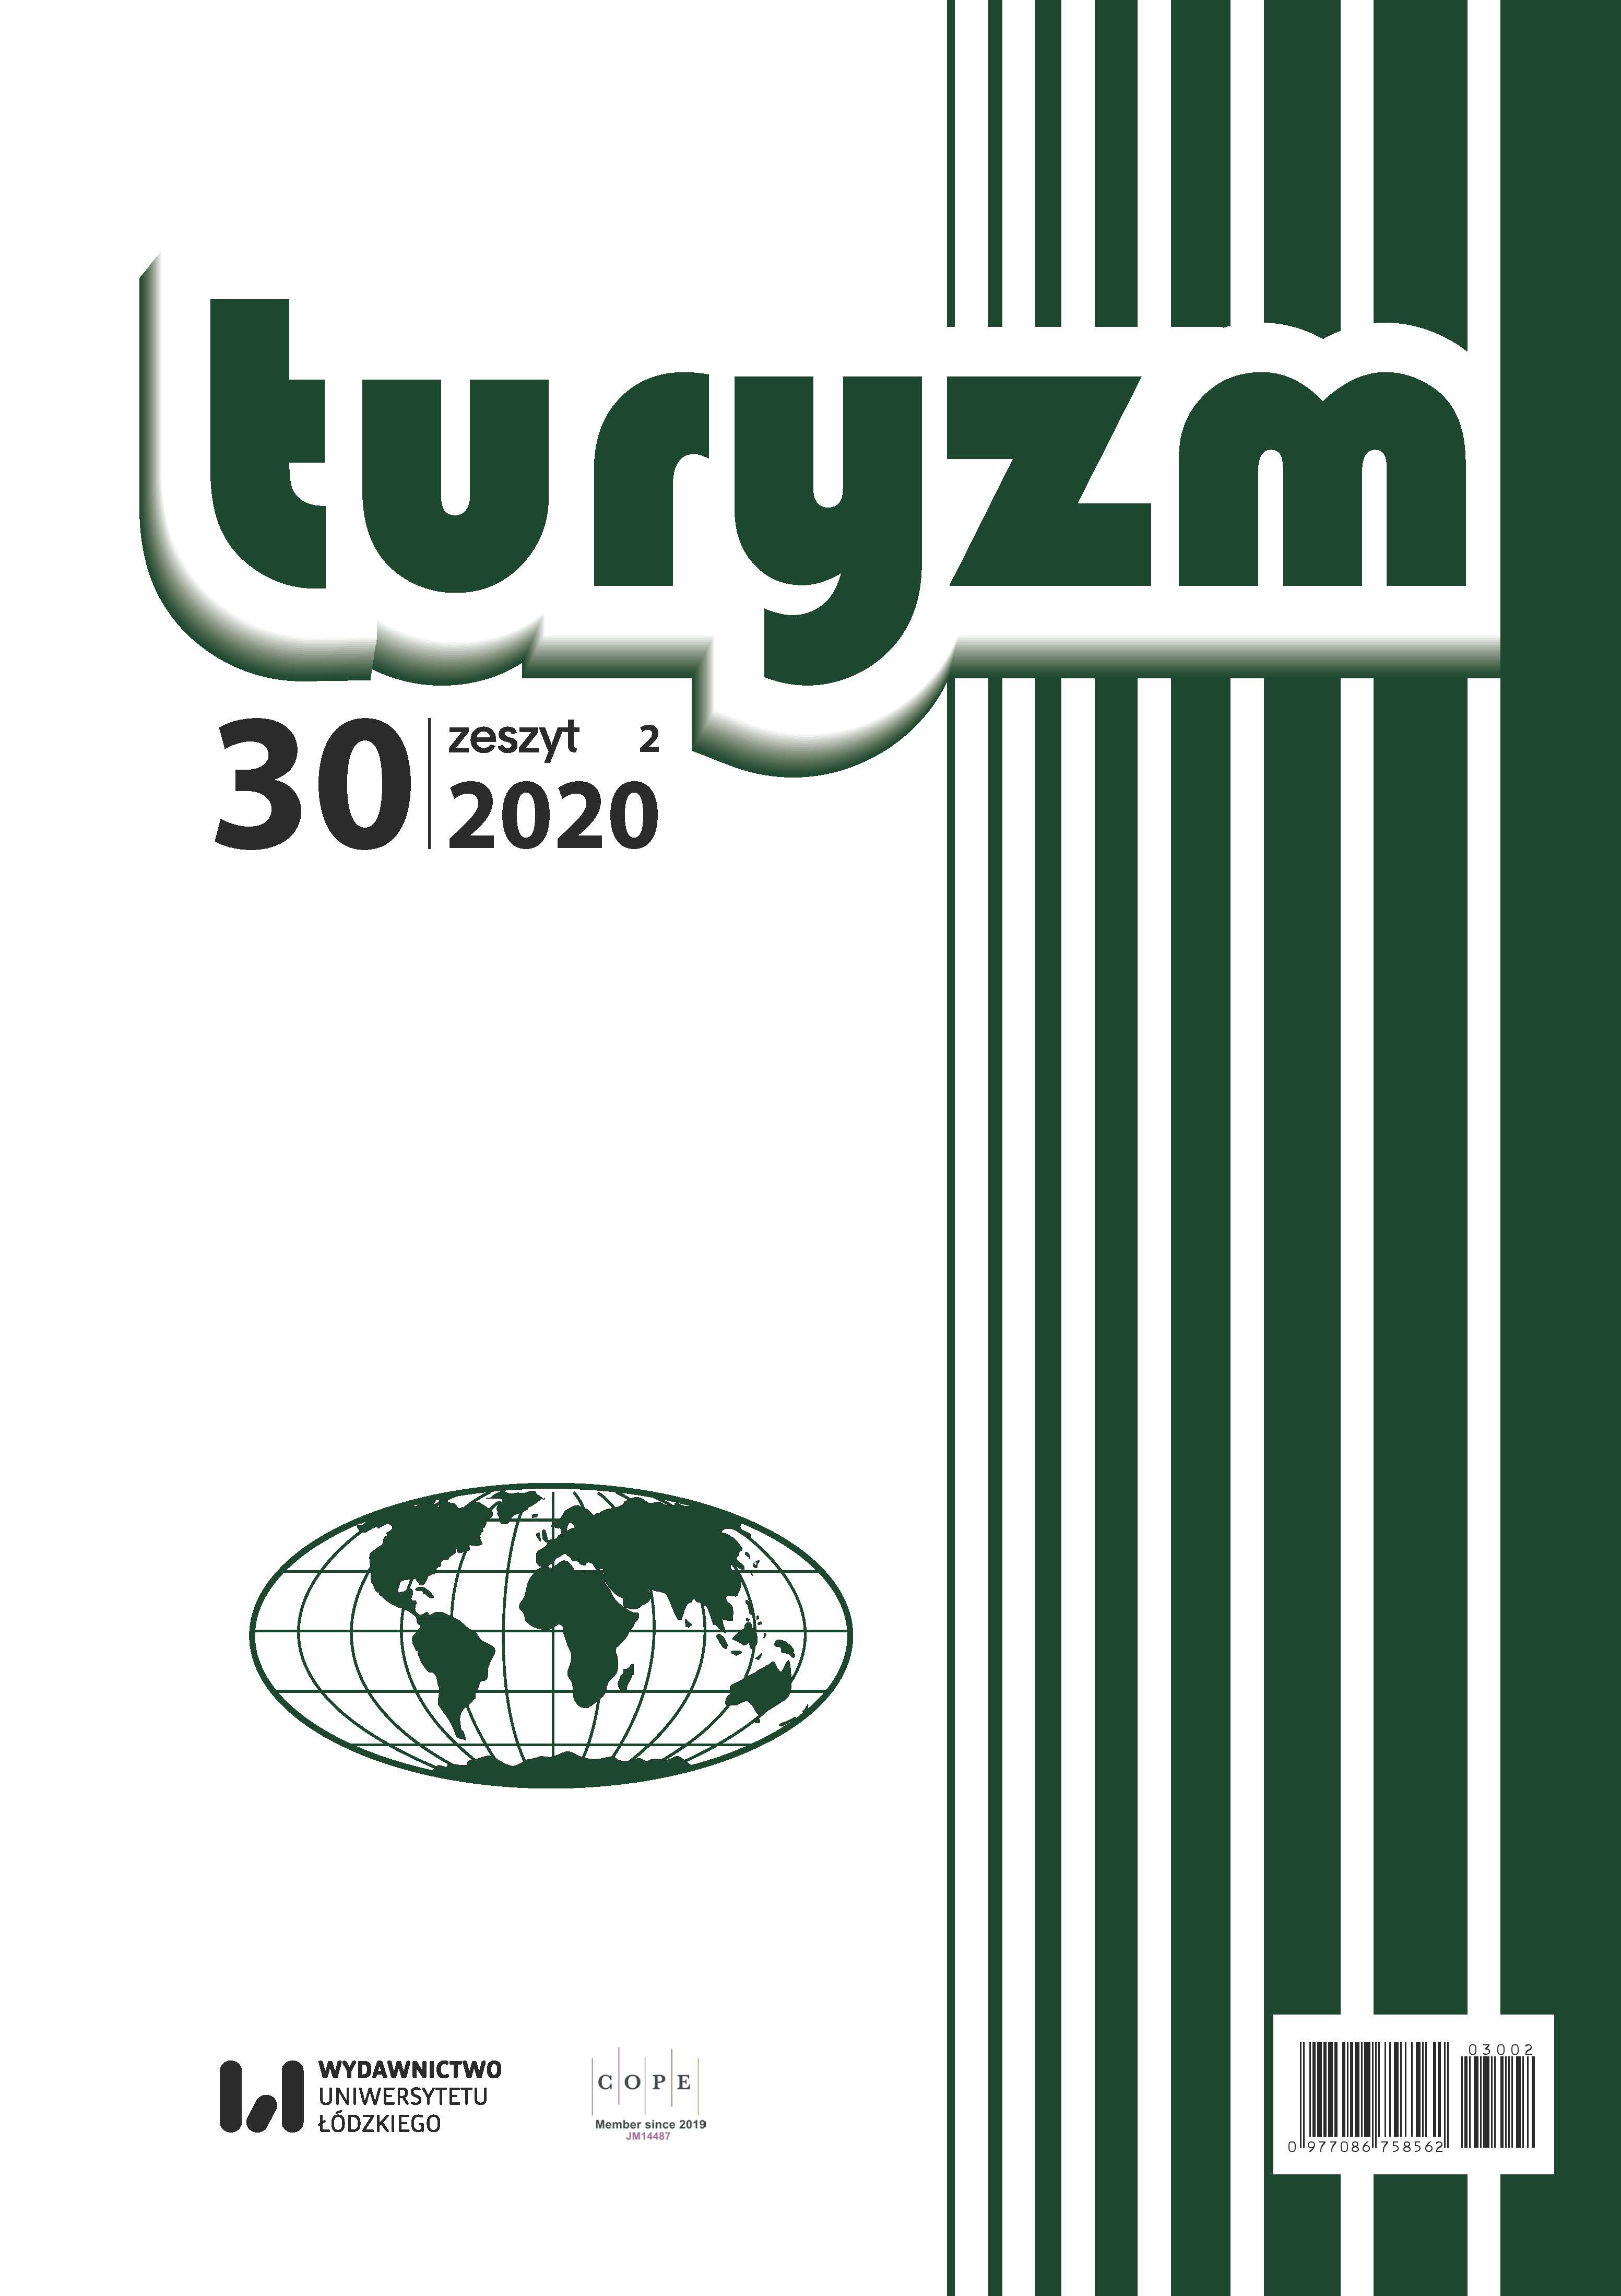 35 years of the „Turyzm/Tourism” journal Cover Image